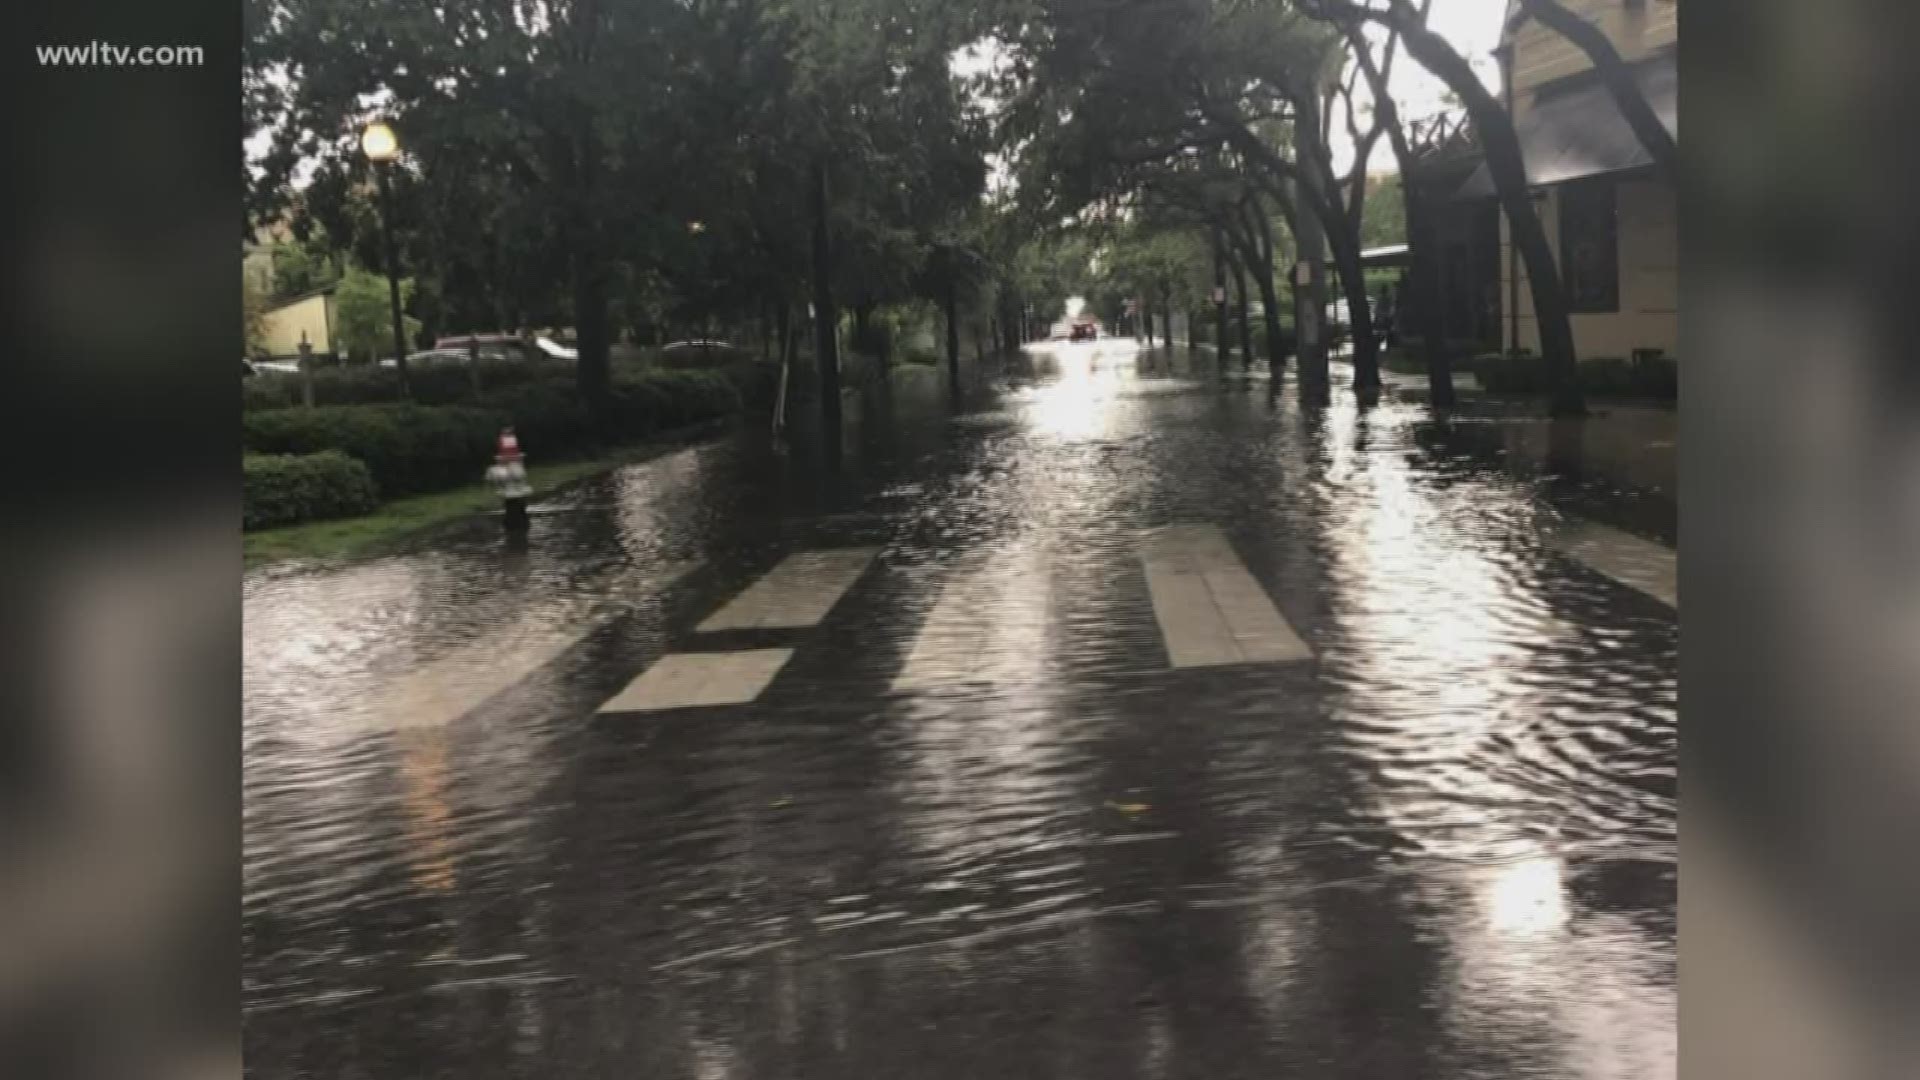 Near the Superdome, 1.88 inches of rain fell in about 30 minutes on Saturday afternoon.